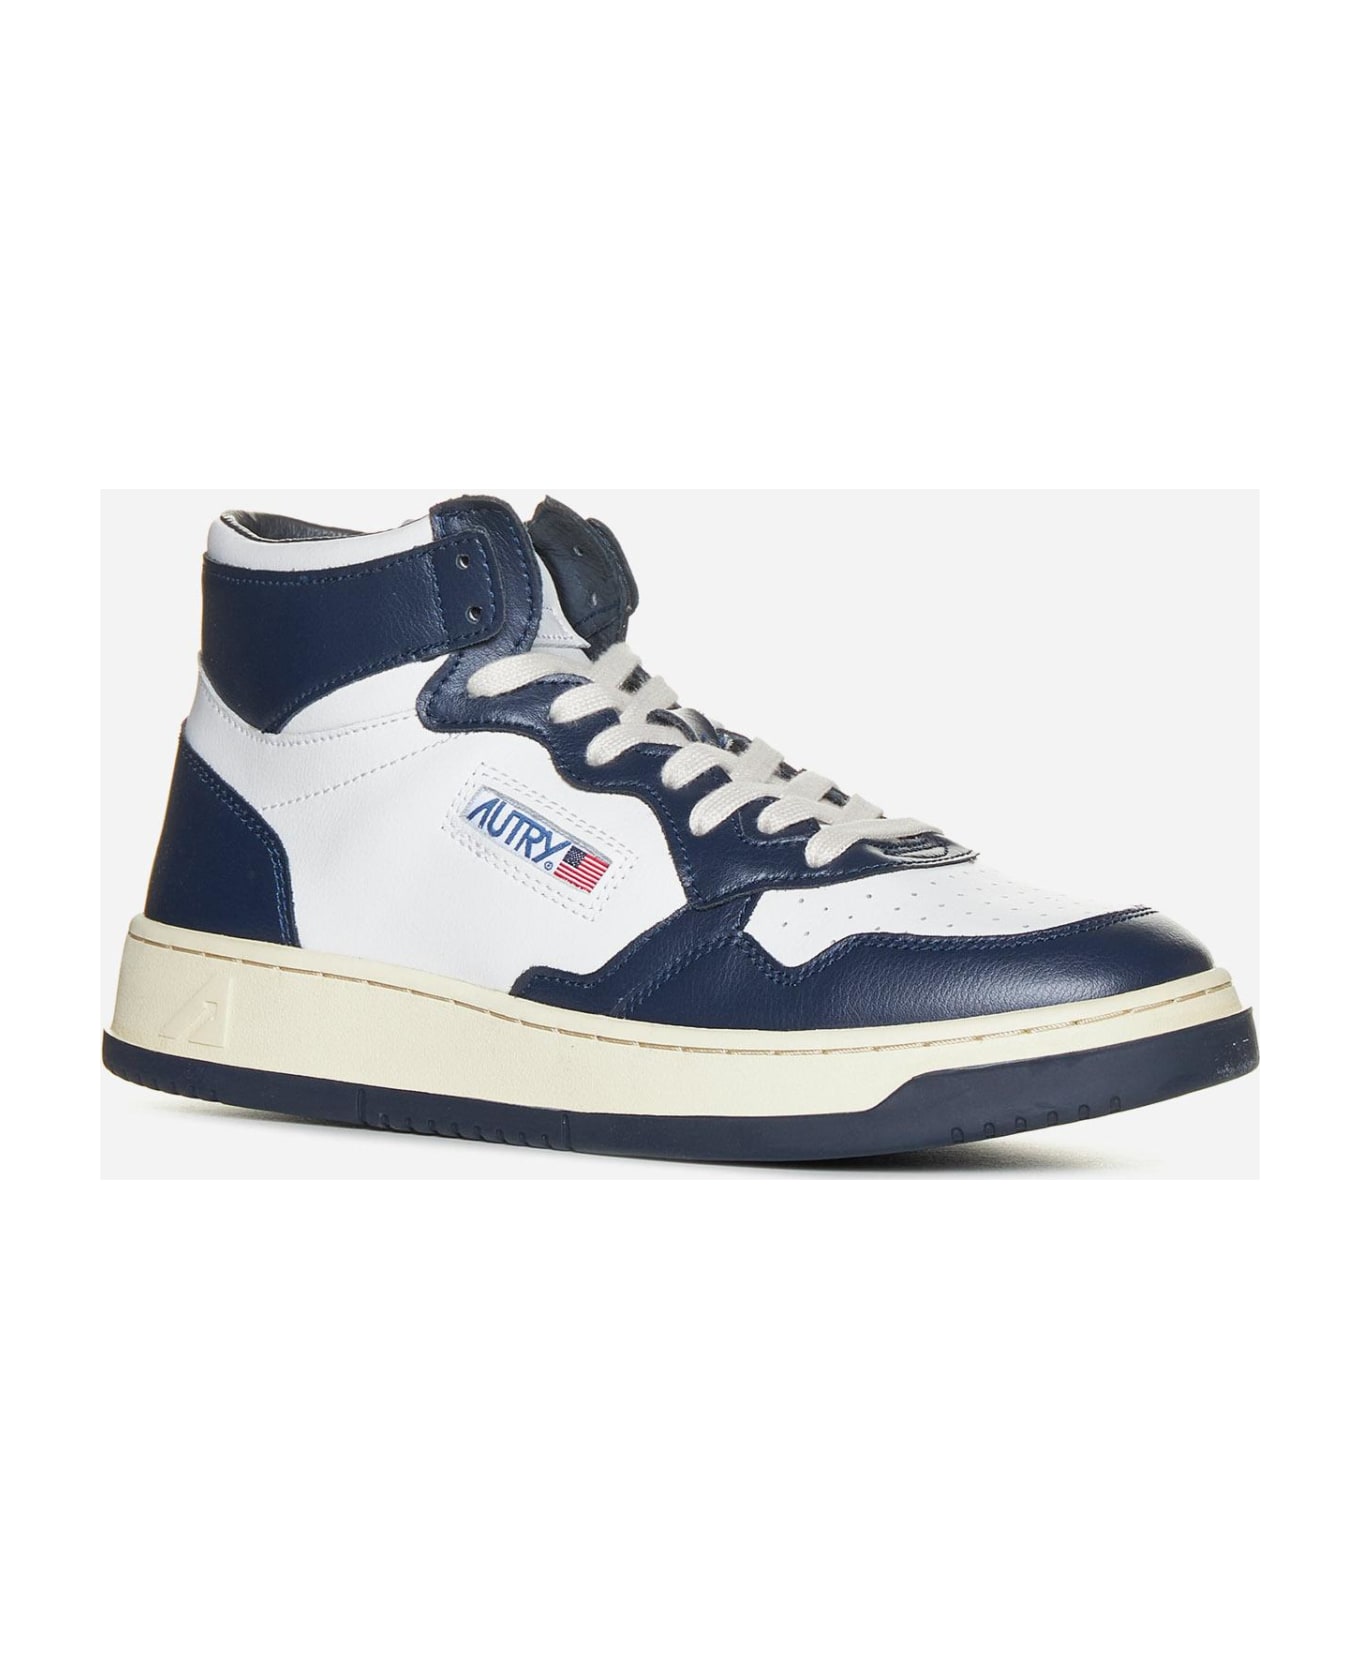 Autry Medalist Leather Mid-top Sneakers - Wht blue スニーカー